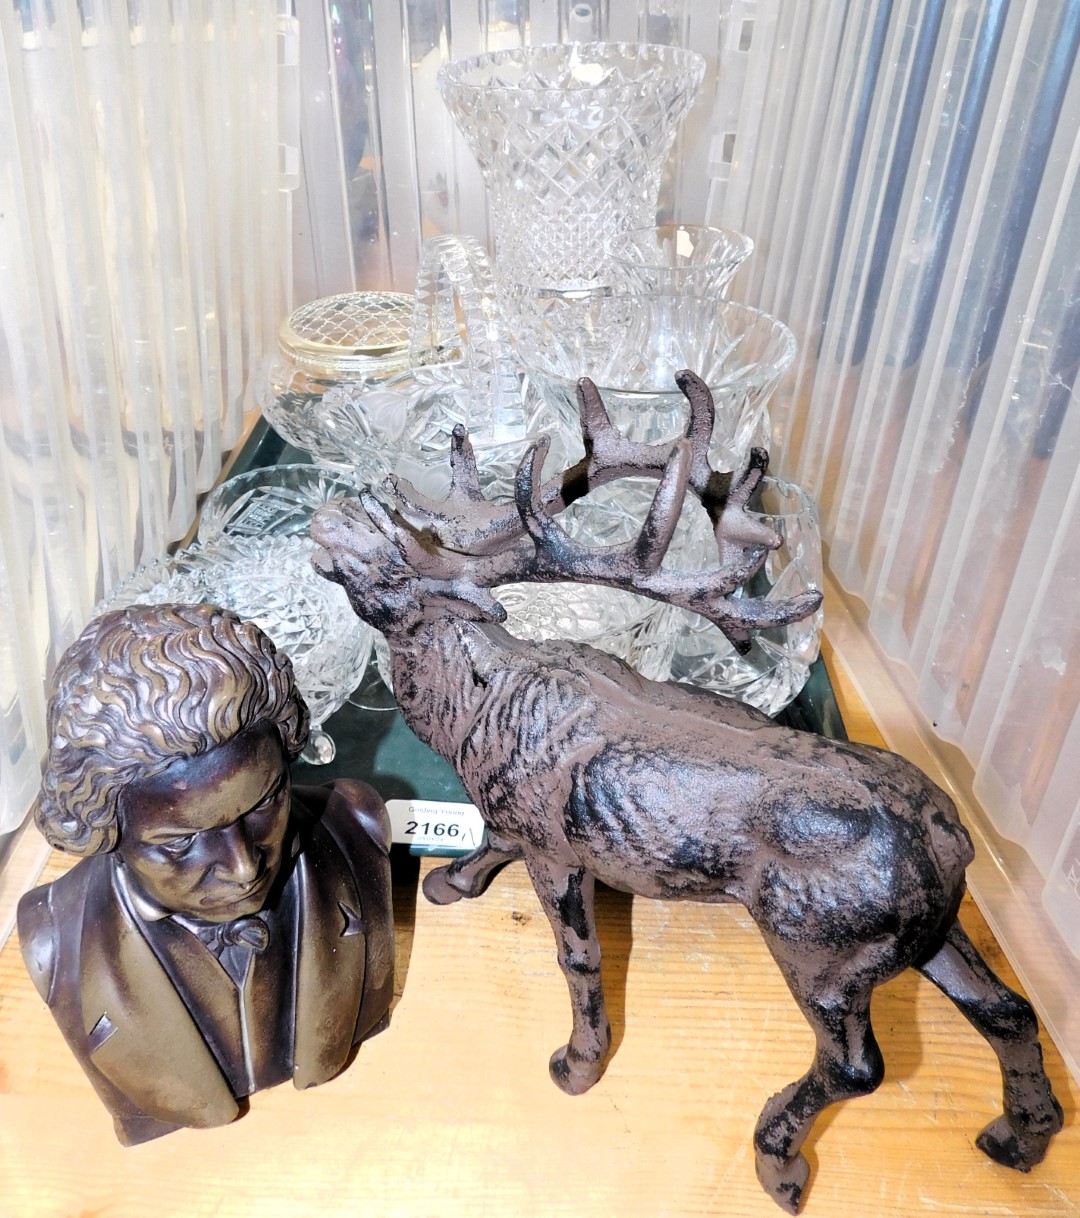 A bust of Beethoven, bronzed model of a reindeer, and glassware including a vase, glass basket, bowl